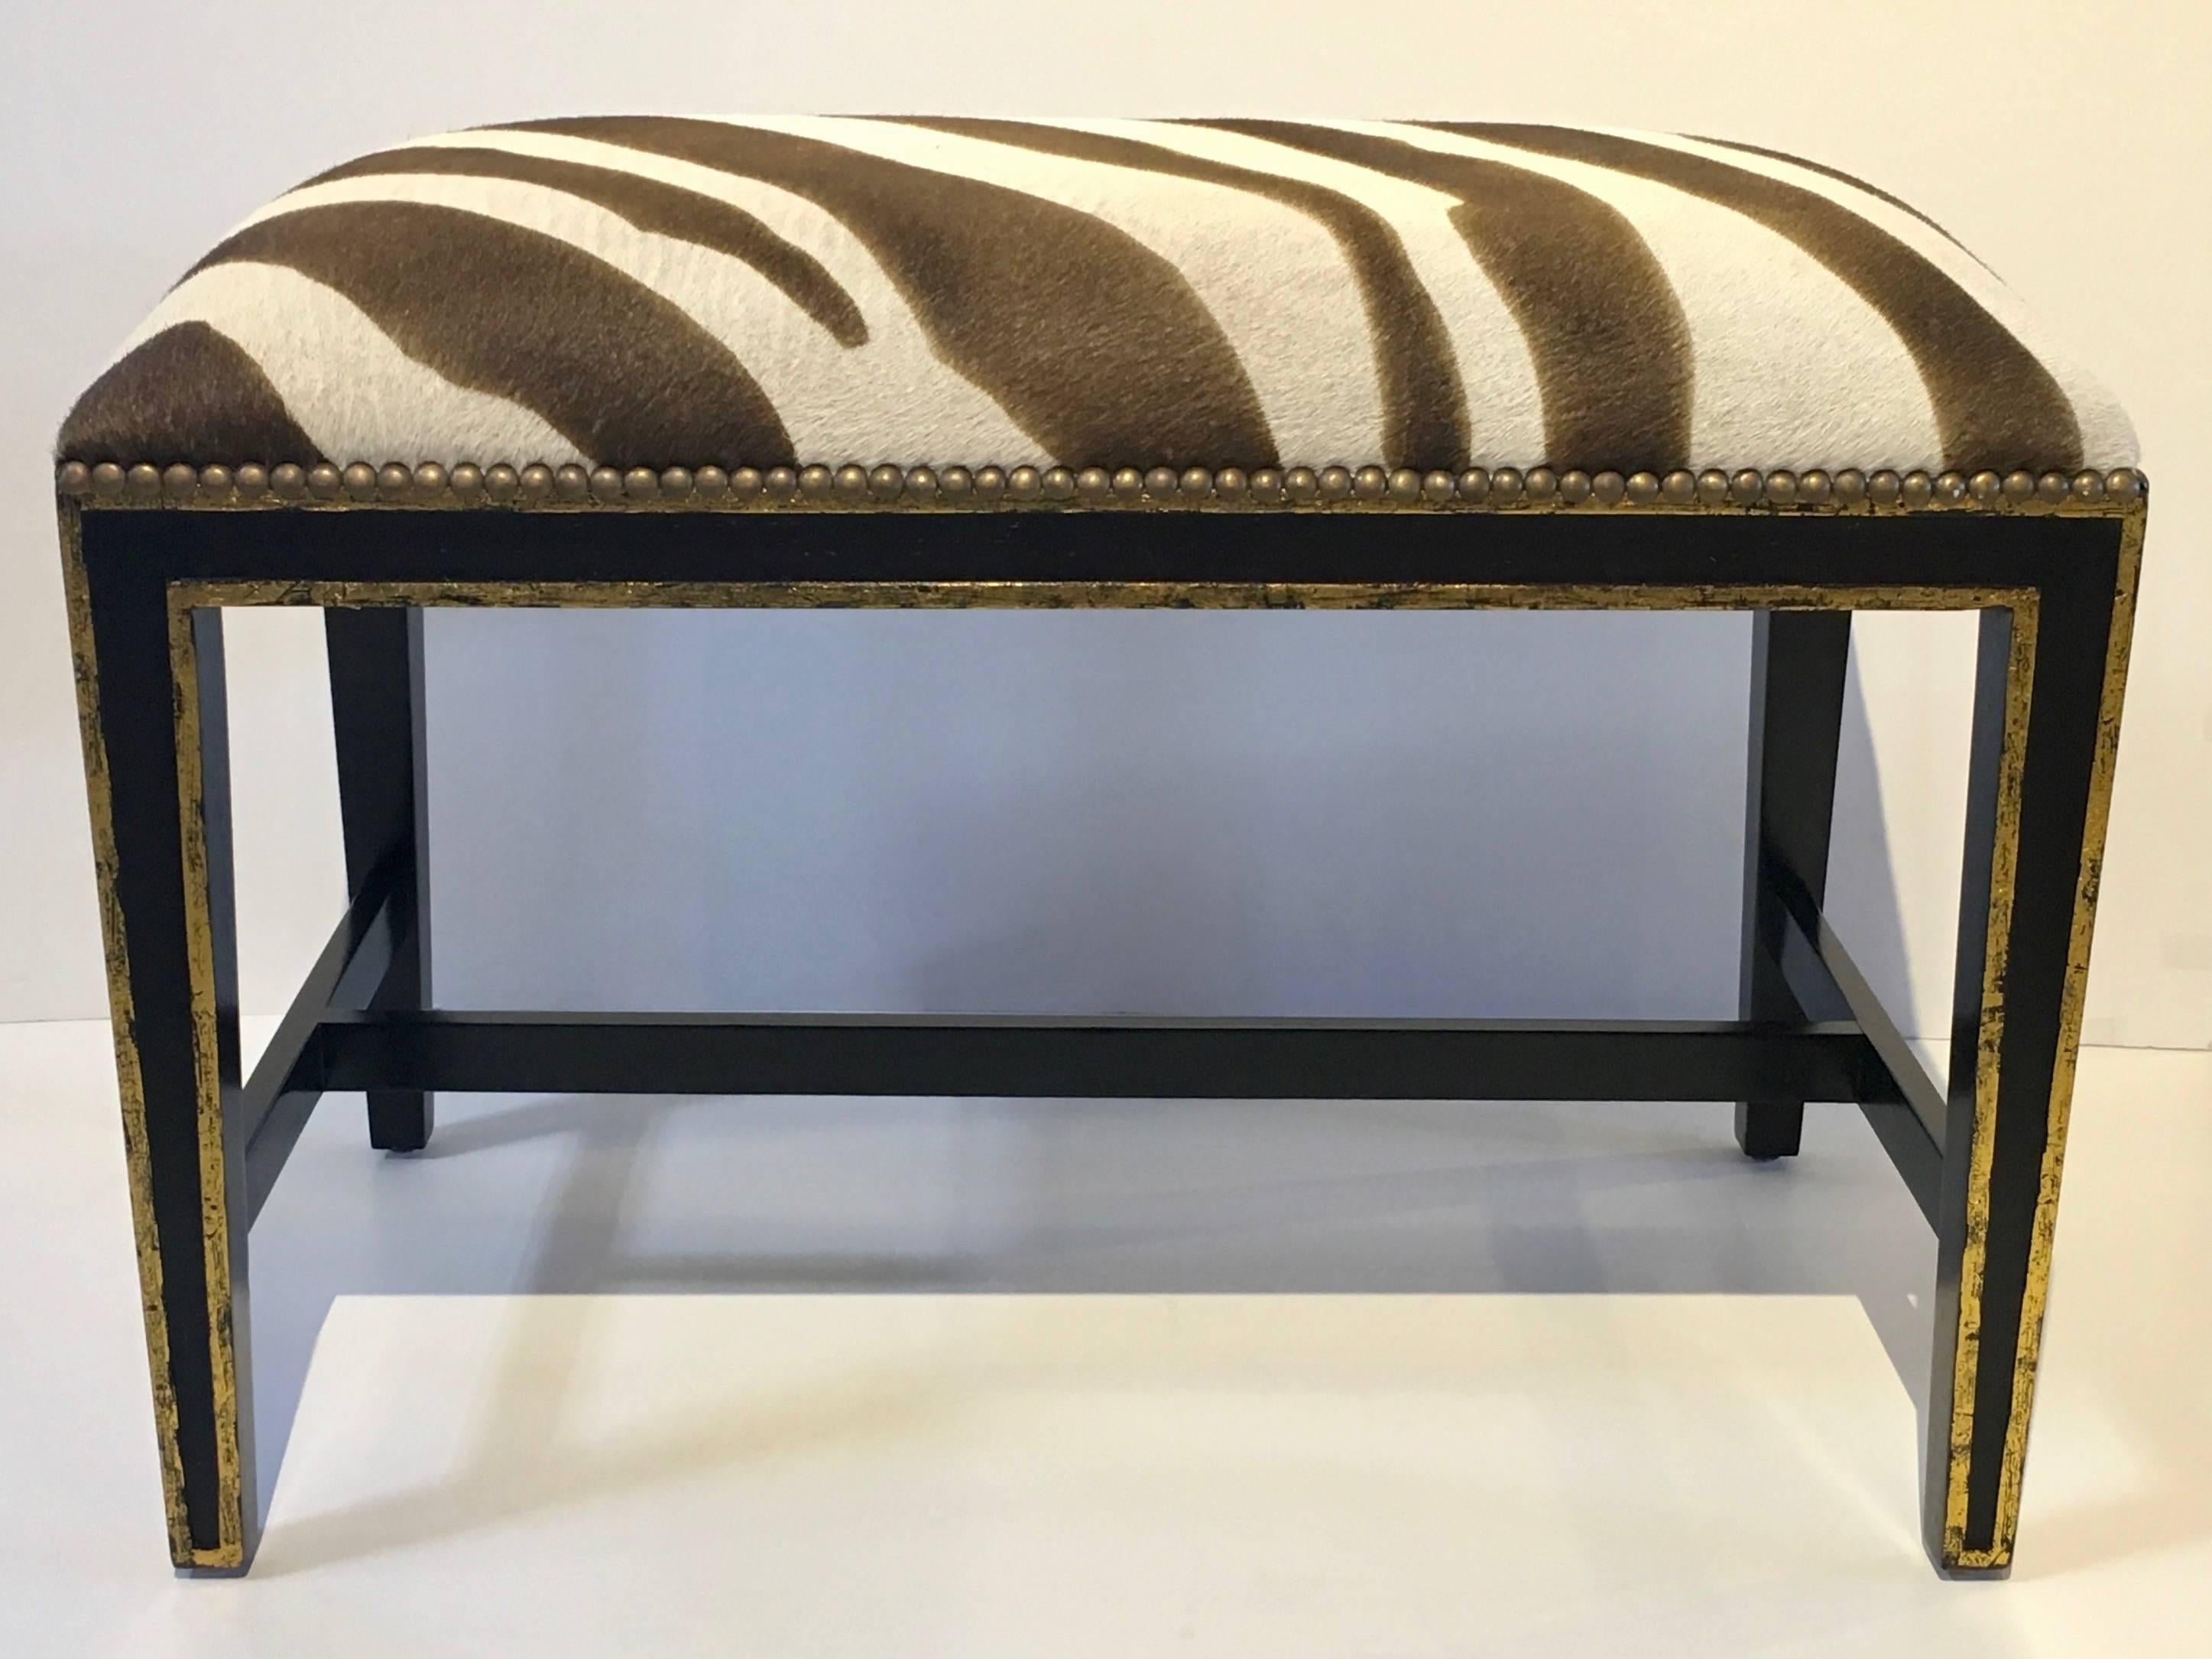 Zebra Printed Hide Pair of Ottomans or Benches, with Brass Nailhead Detailing 2